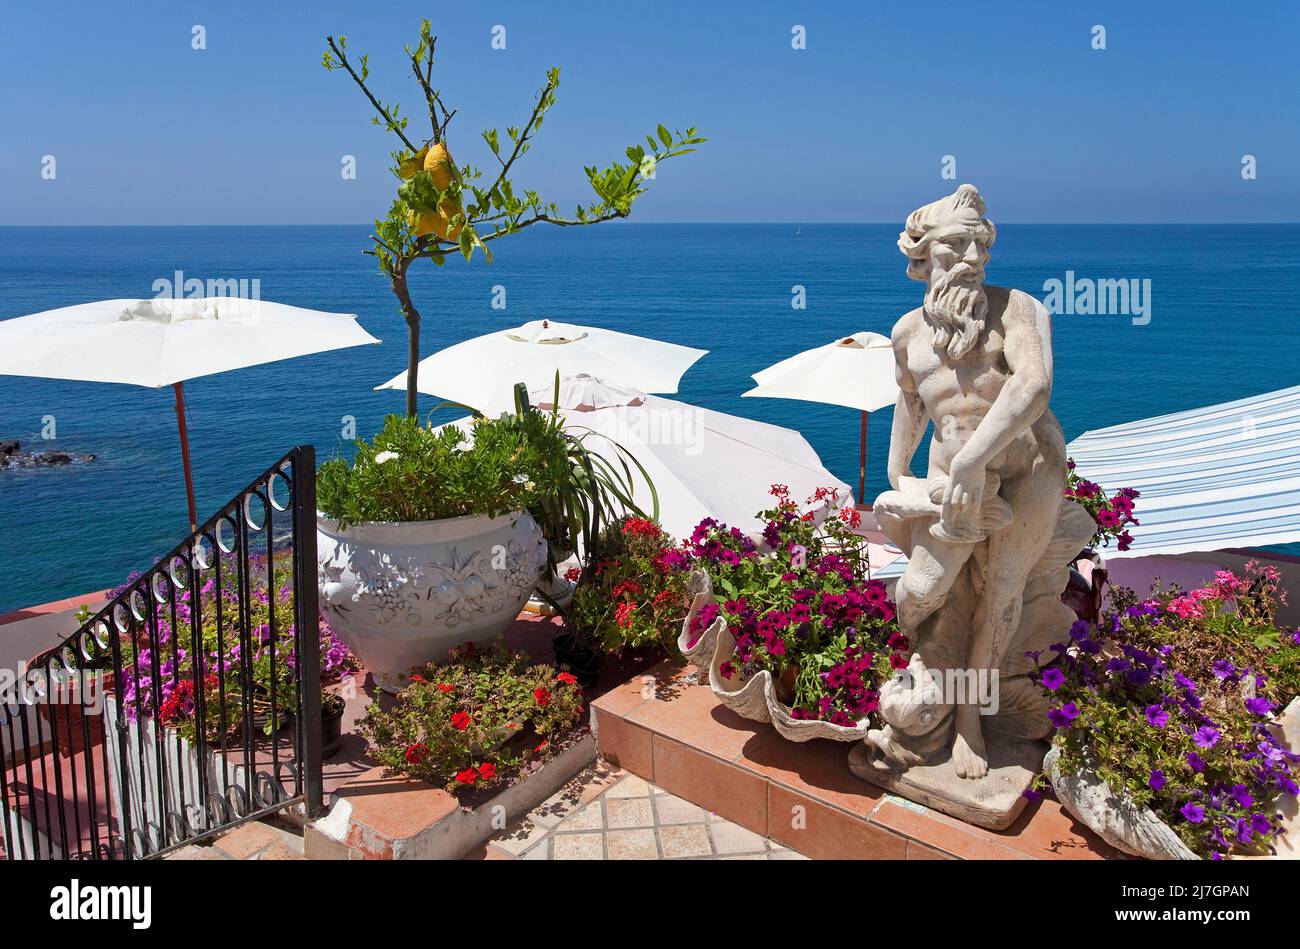 Sculpture and a lemon tree at the picturesque fishing village, Sant' Angelo, Ischia island, Gulf of Neapel, Italy, Mediterranean Sea, Europe Stock Photo